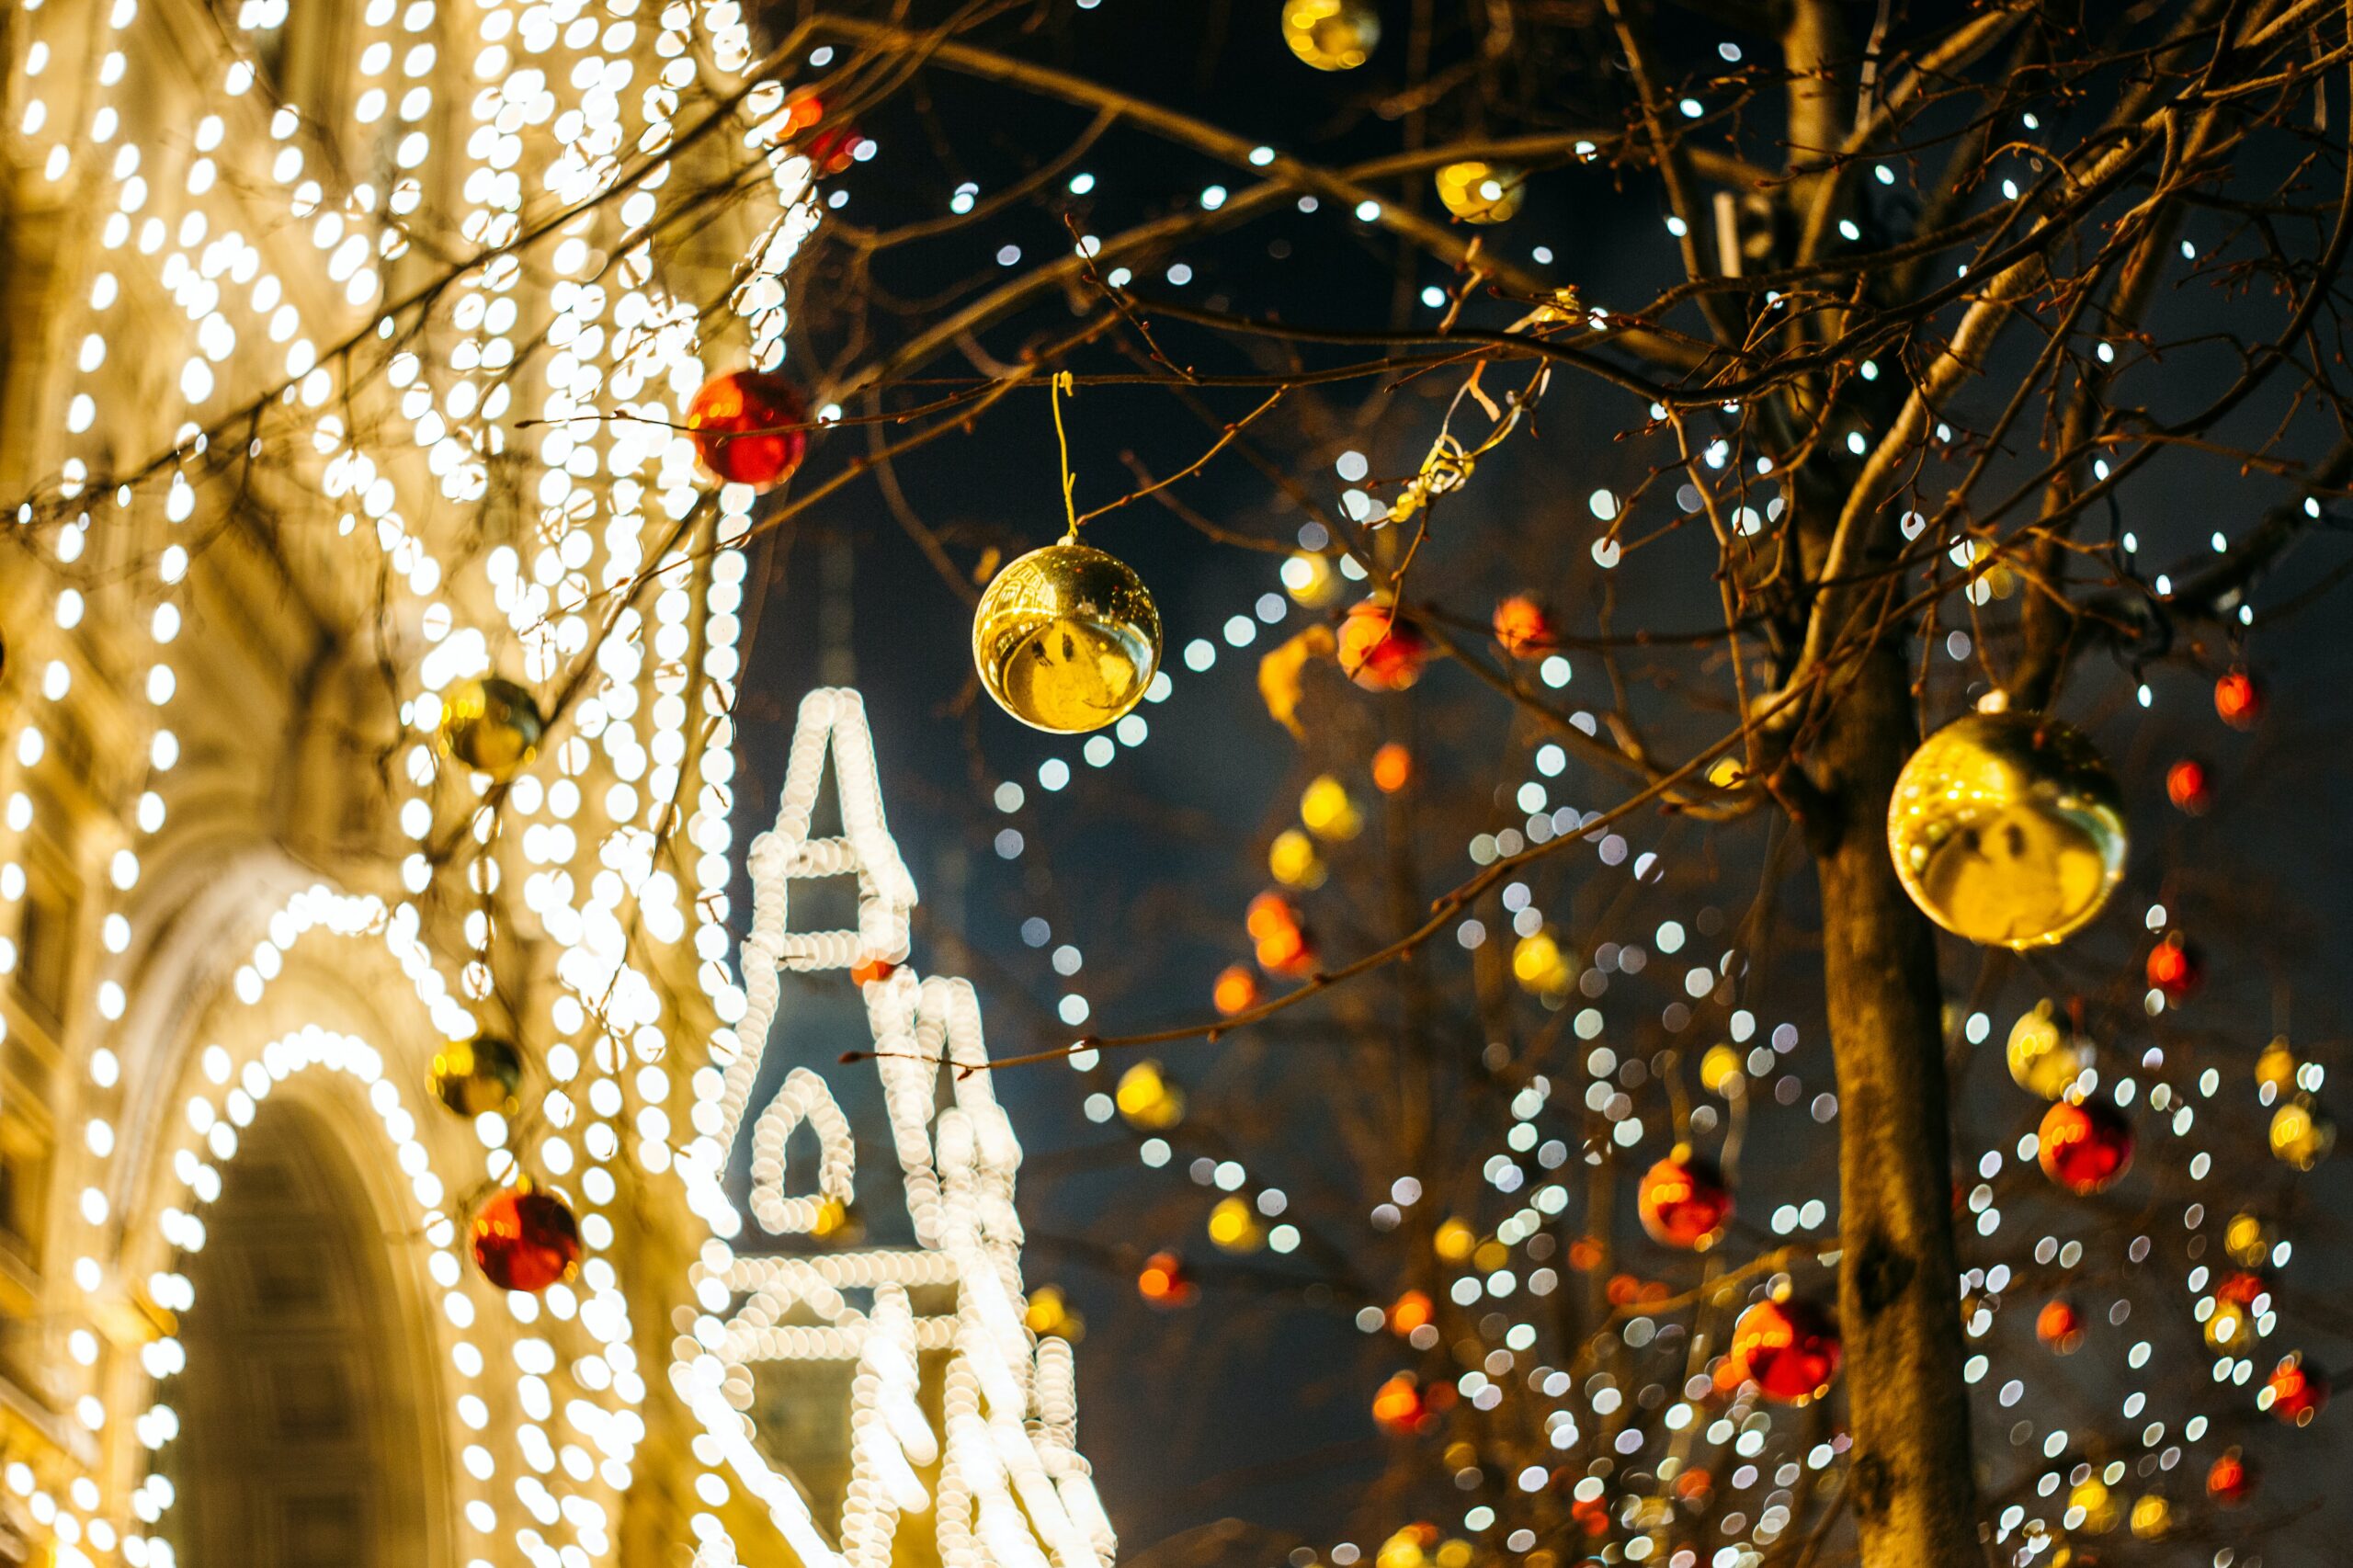 Christmas Lights and ornaments decorating a city street